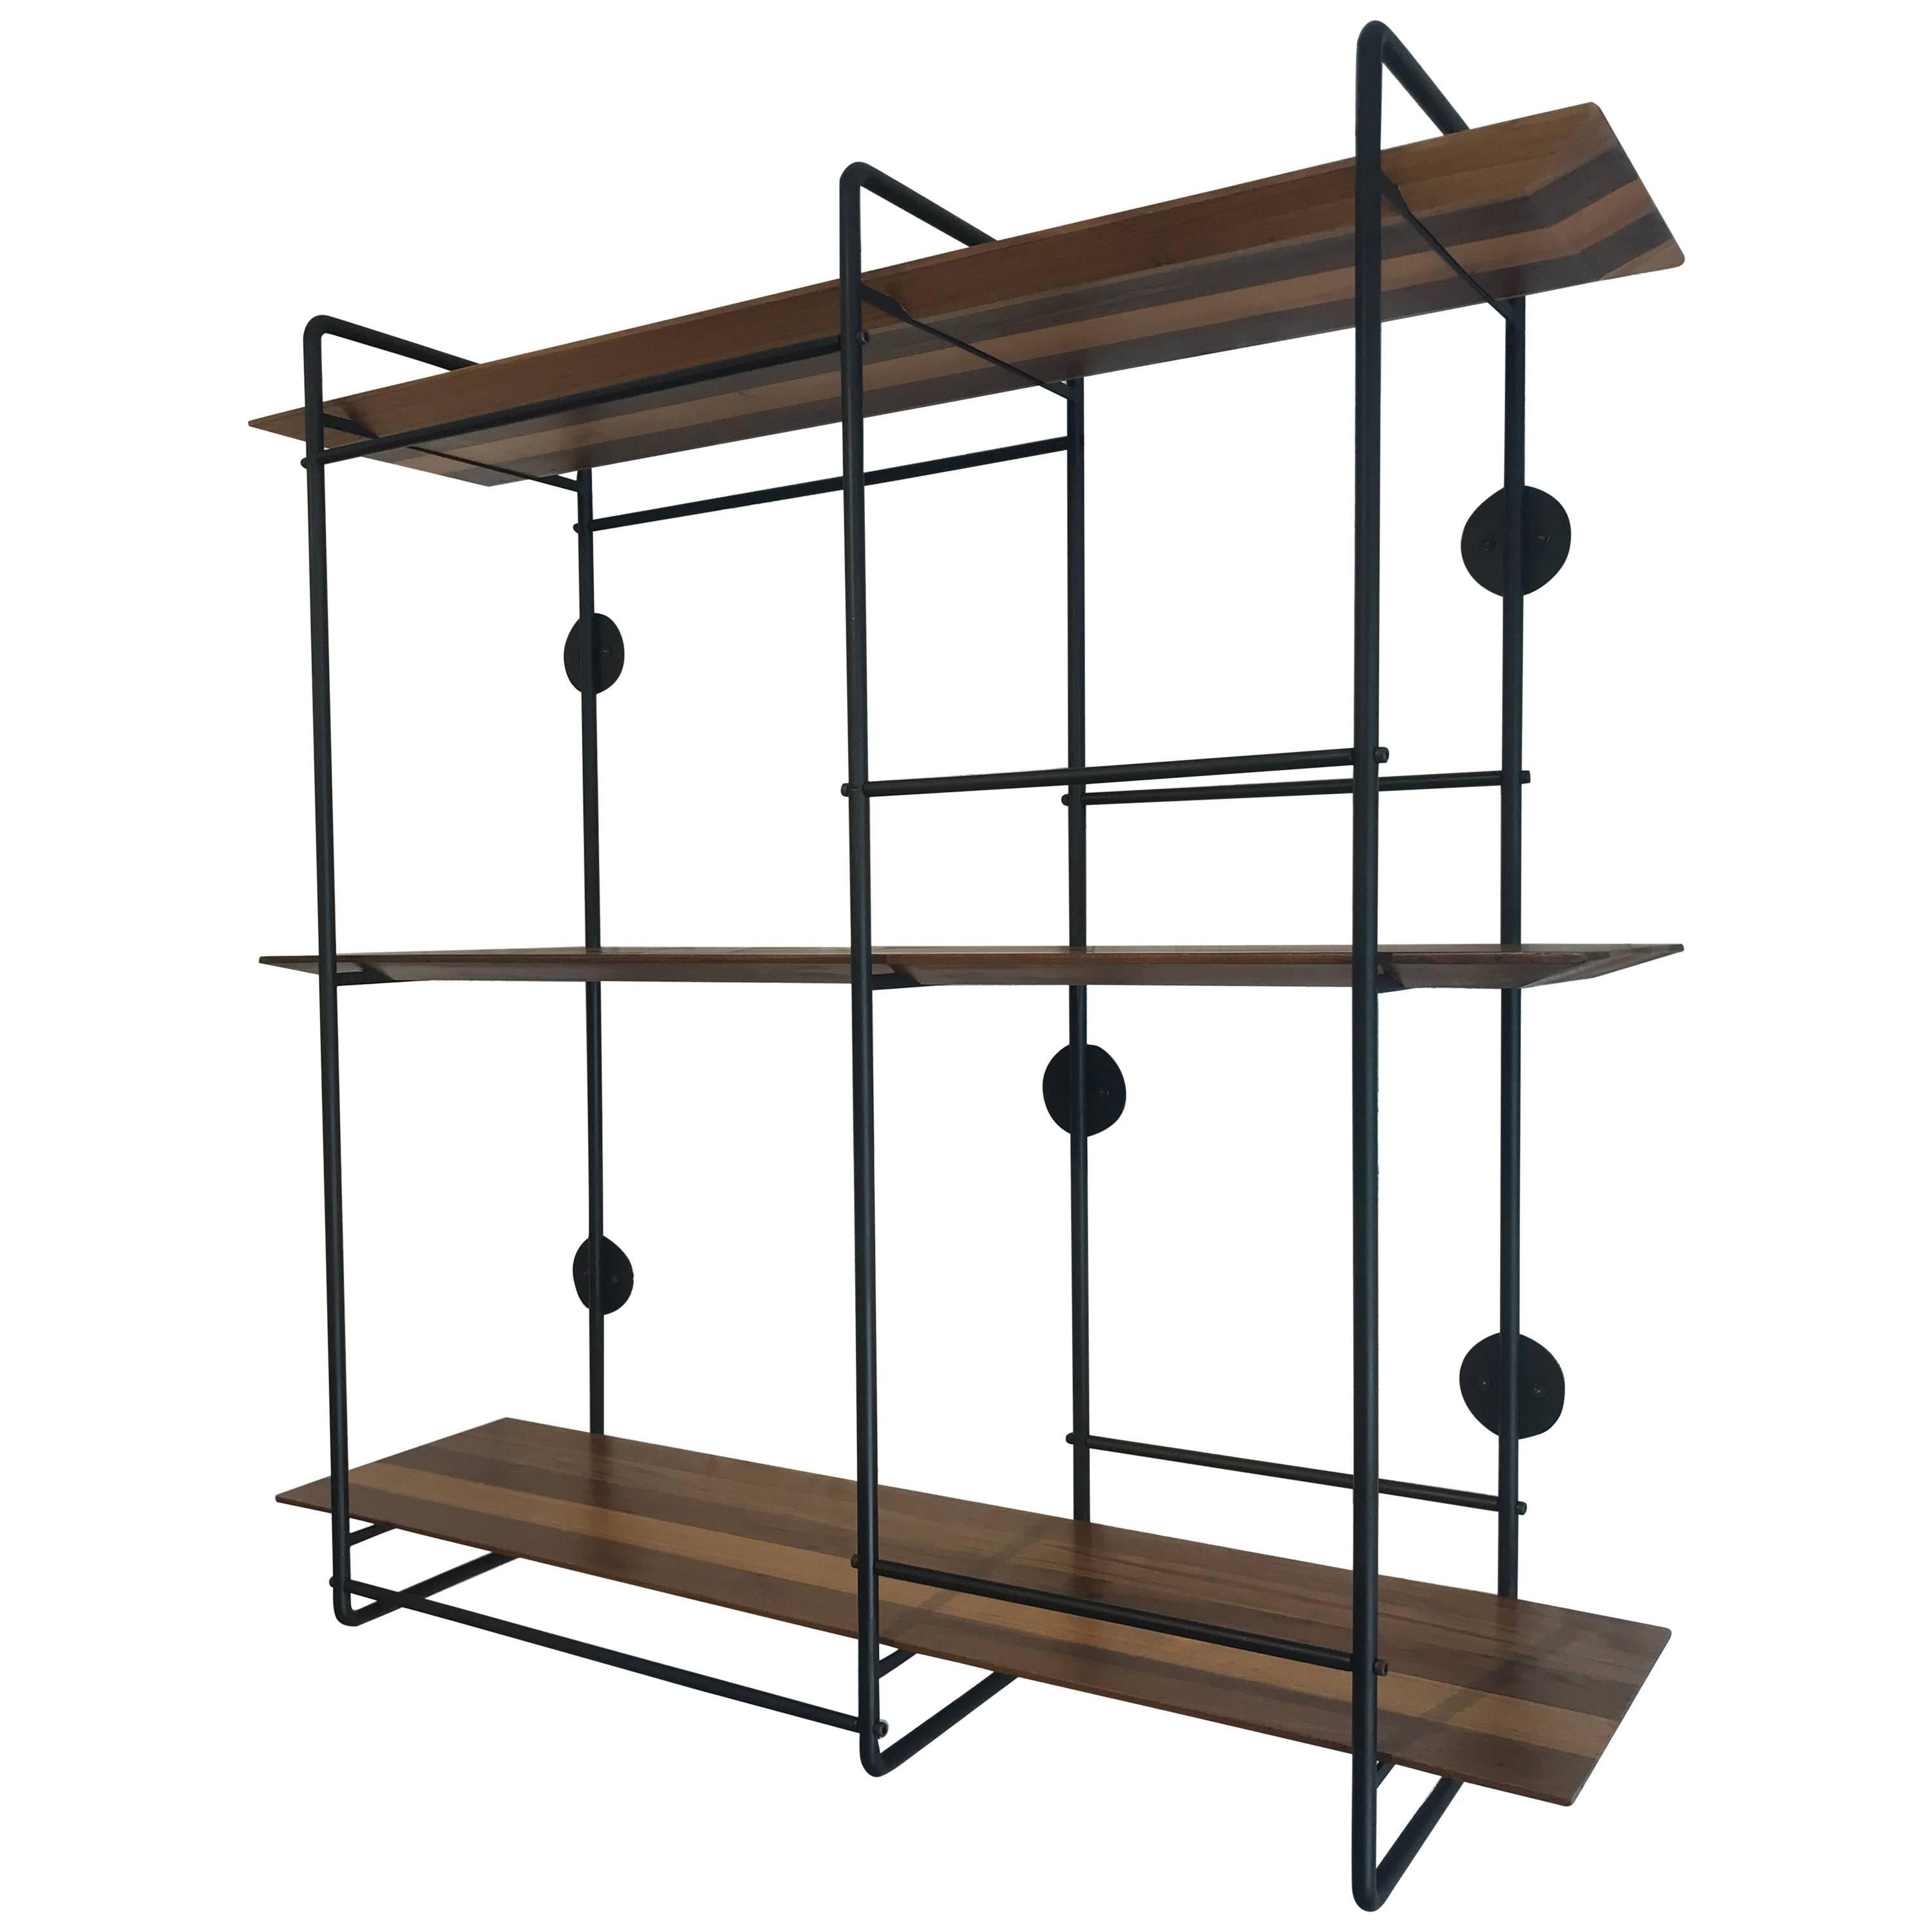 "Dots" Floating Shelf Unit in Stainless Steel and Hardwood For Sale